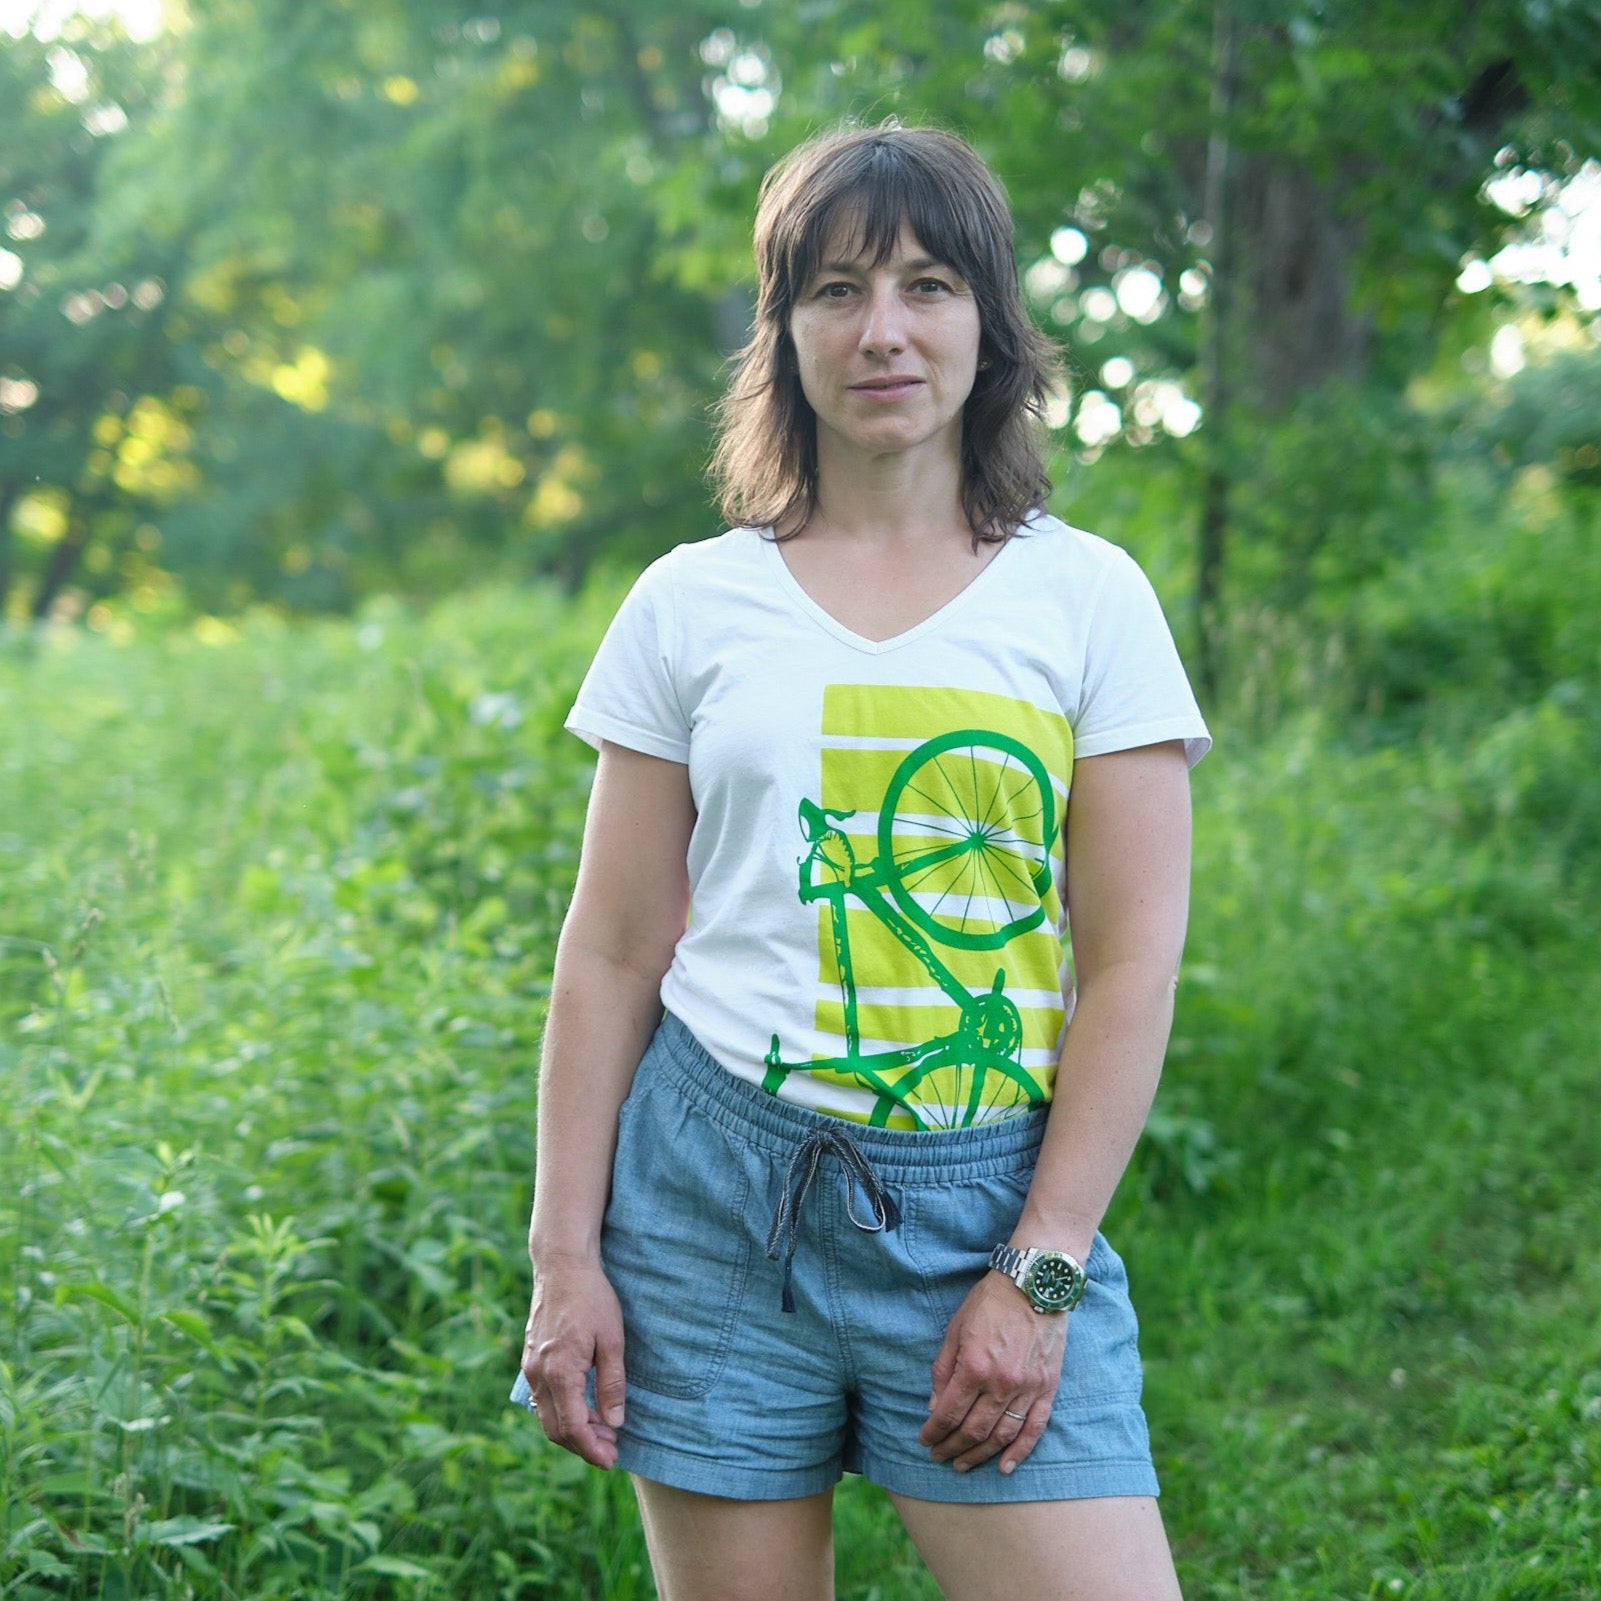 female model wearing white V-neck with green printed bike shirt in front of greenery